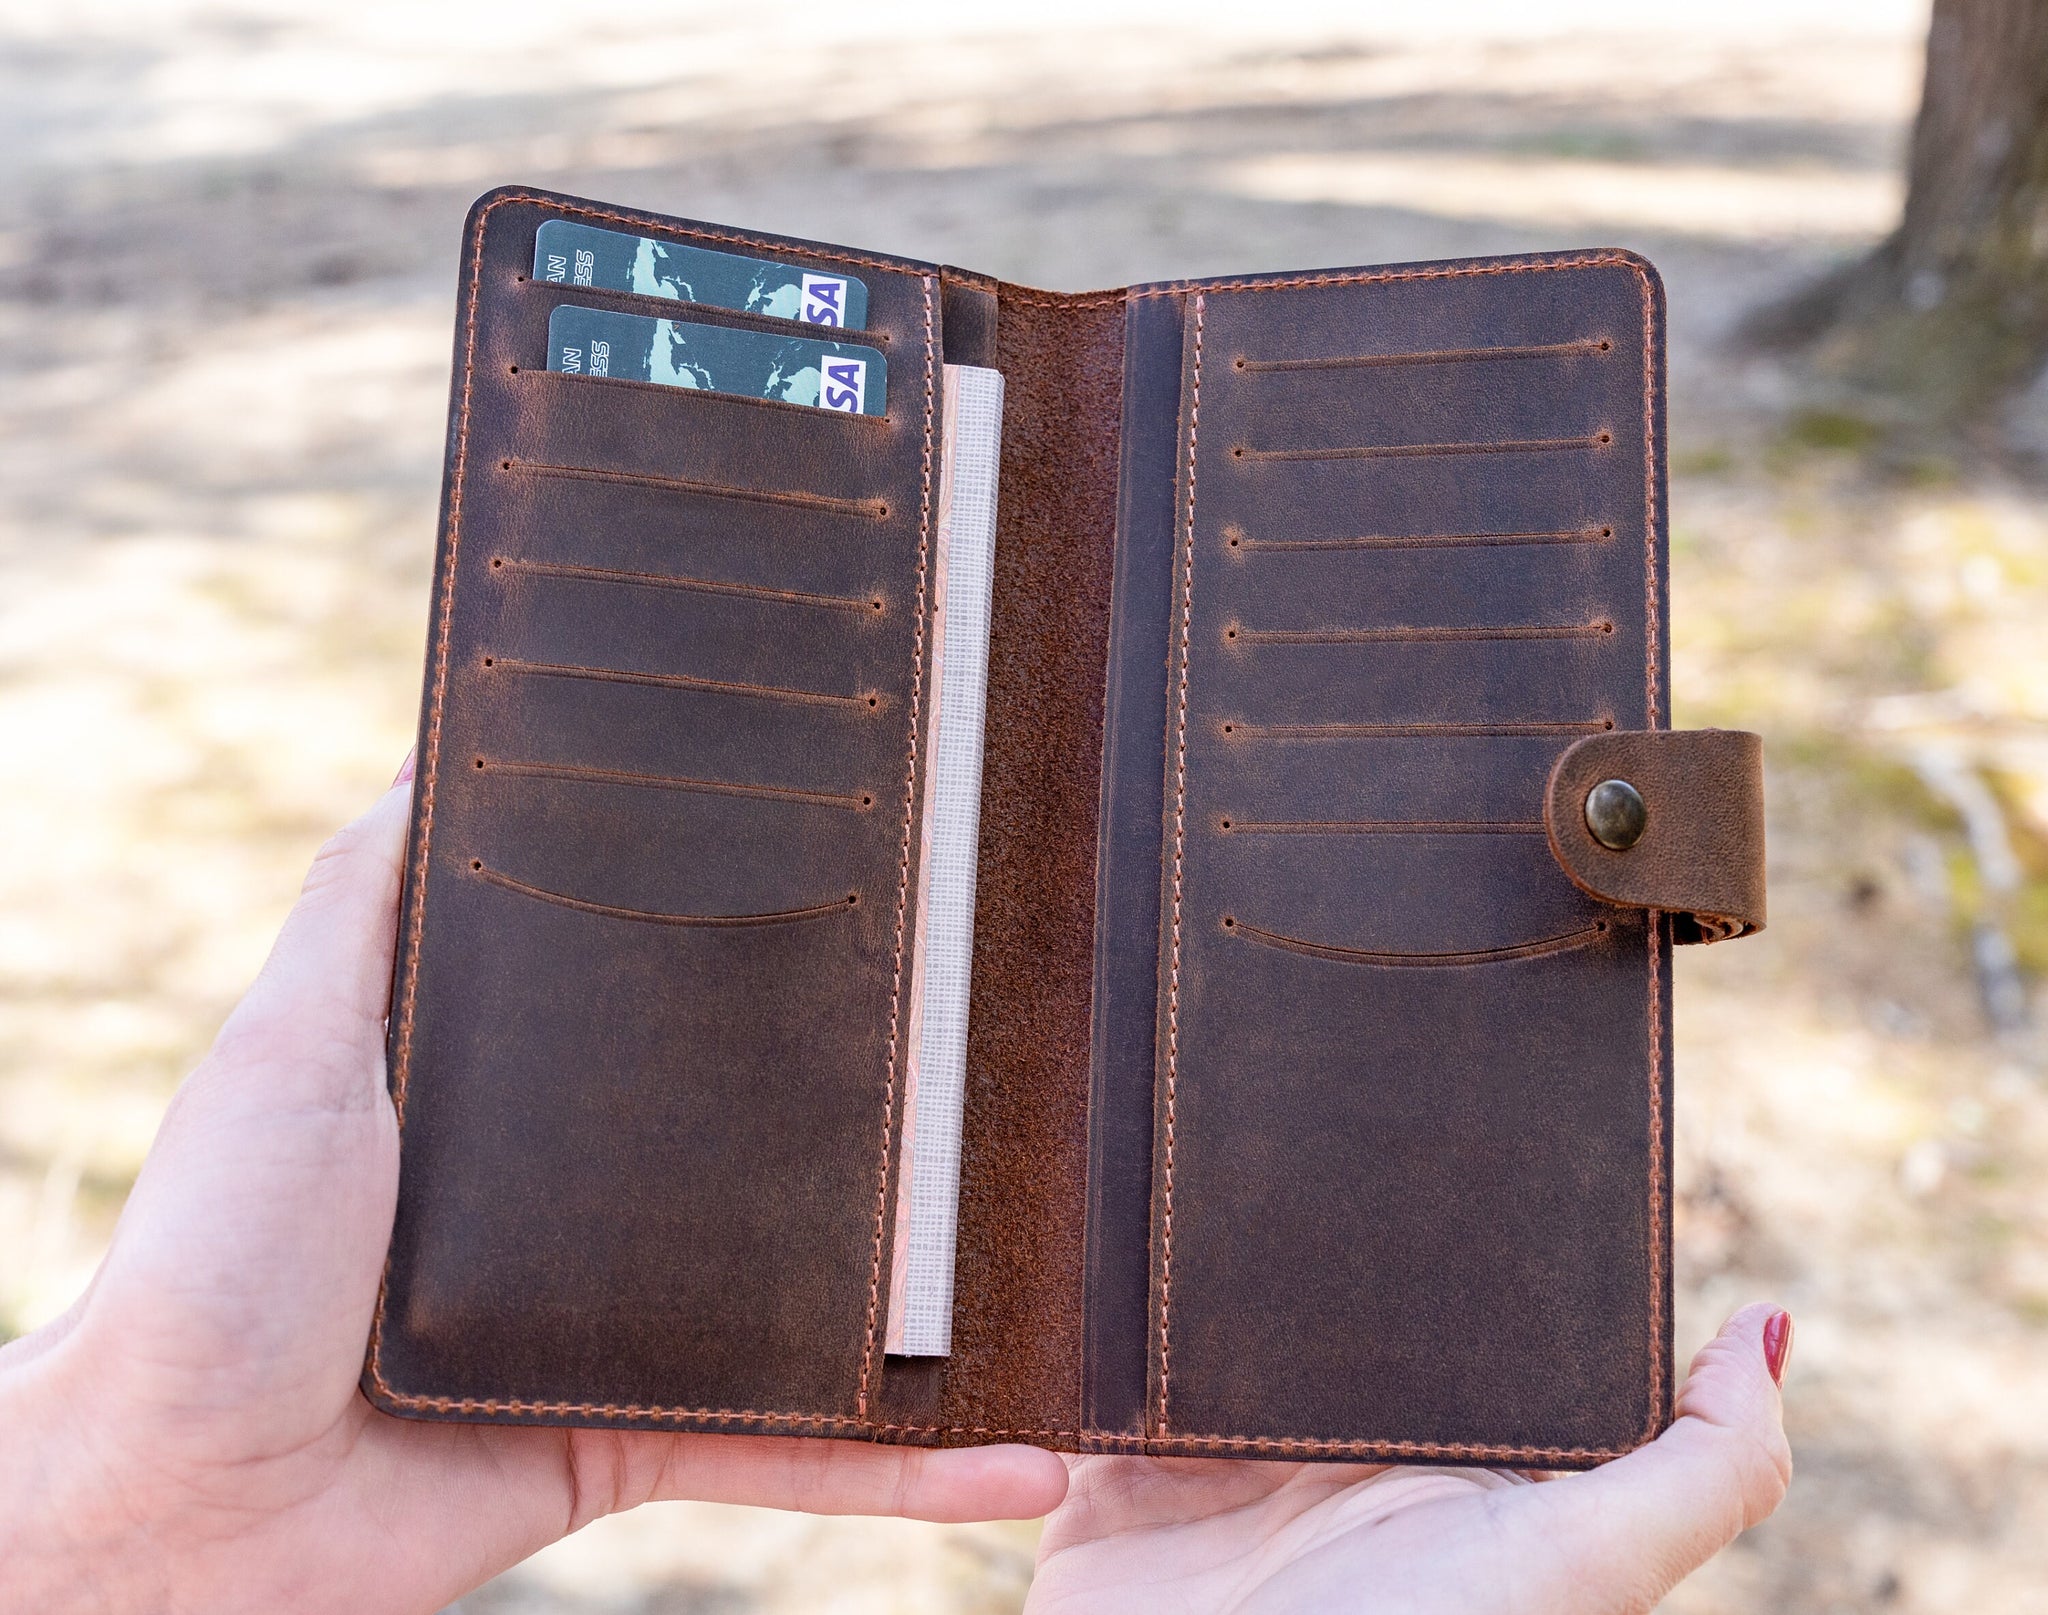 Personalized Leather Checkbook Cover